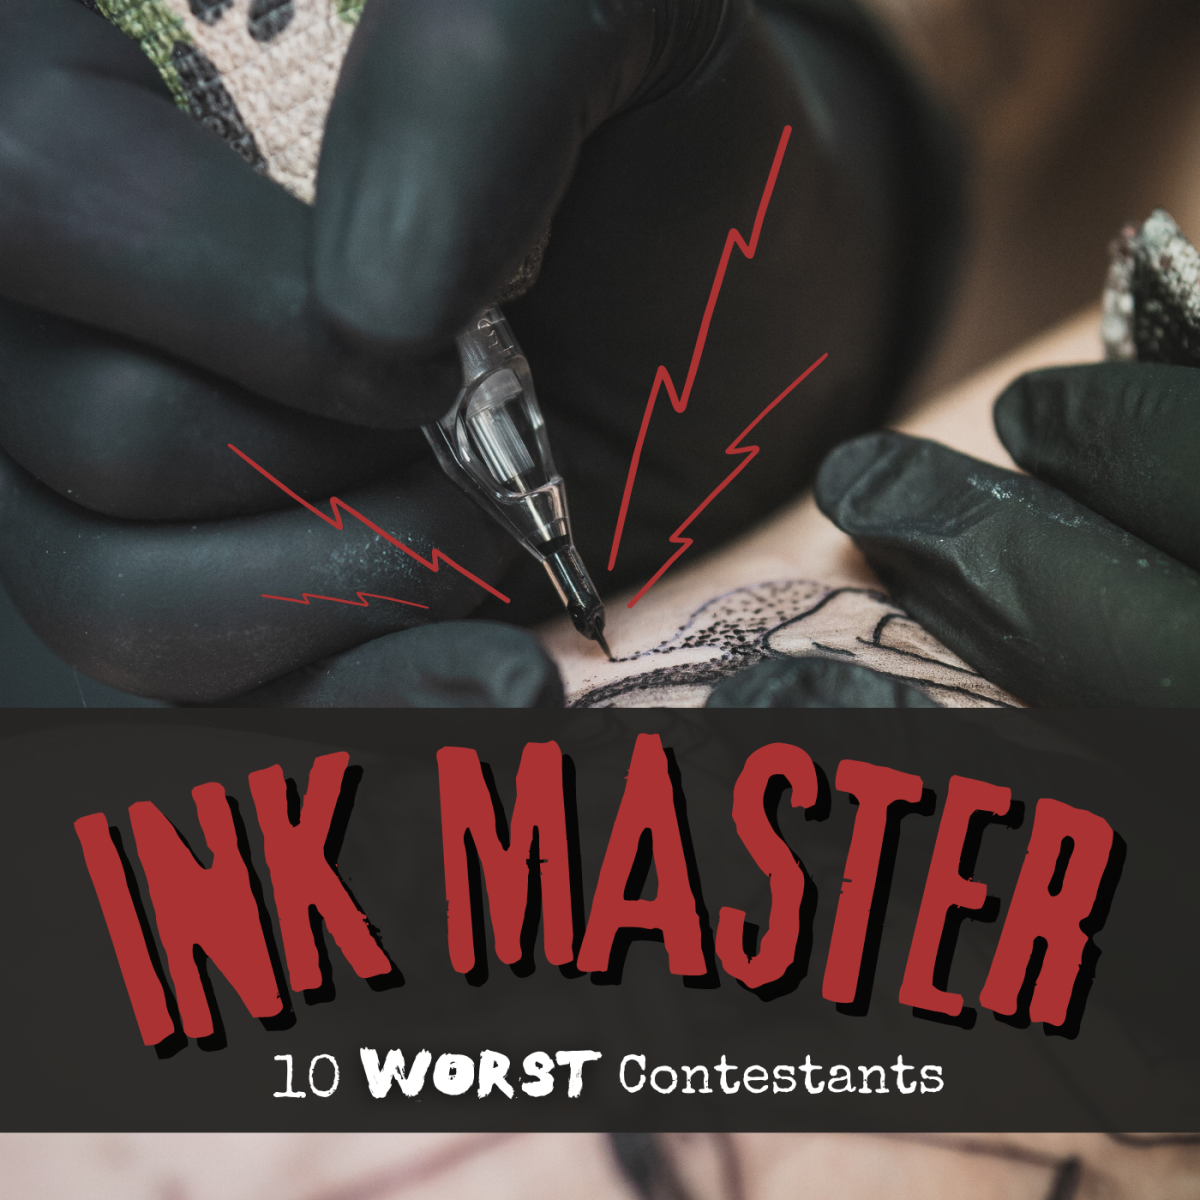 The bad tattoos on "Ink Master" are almost more memorable than the good ones. Check out 10 of the show's worst contestants of all time.